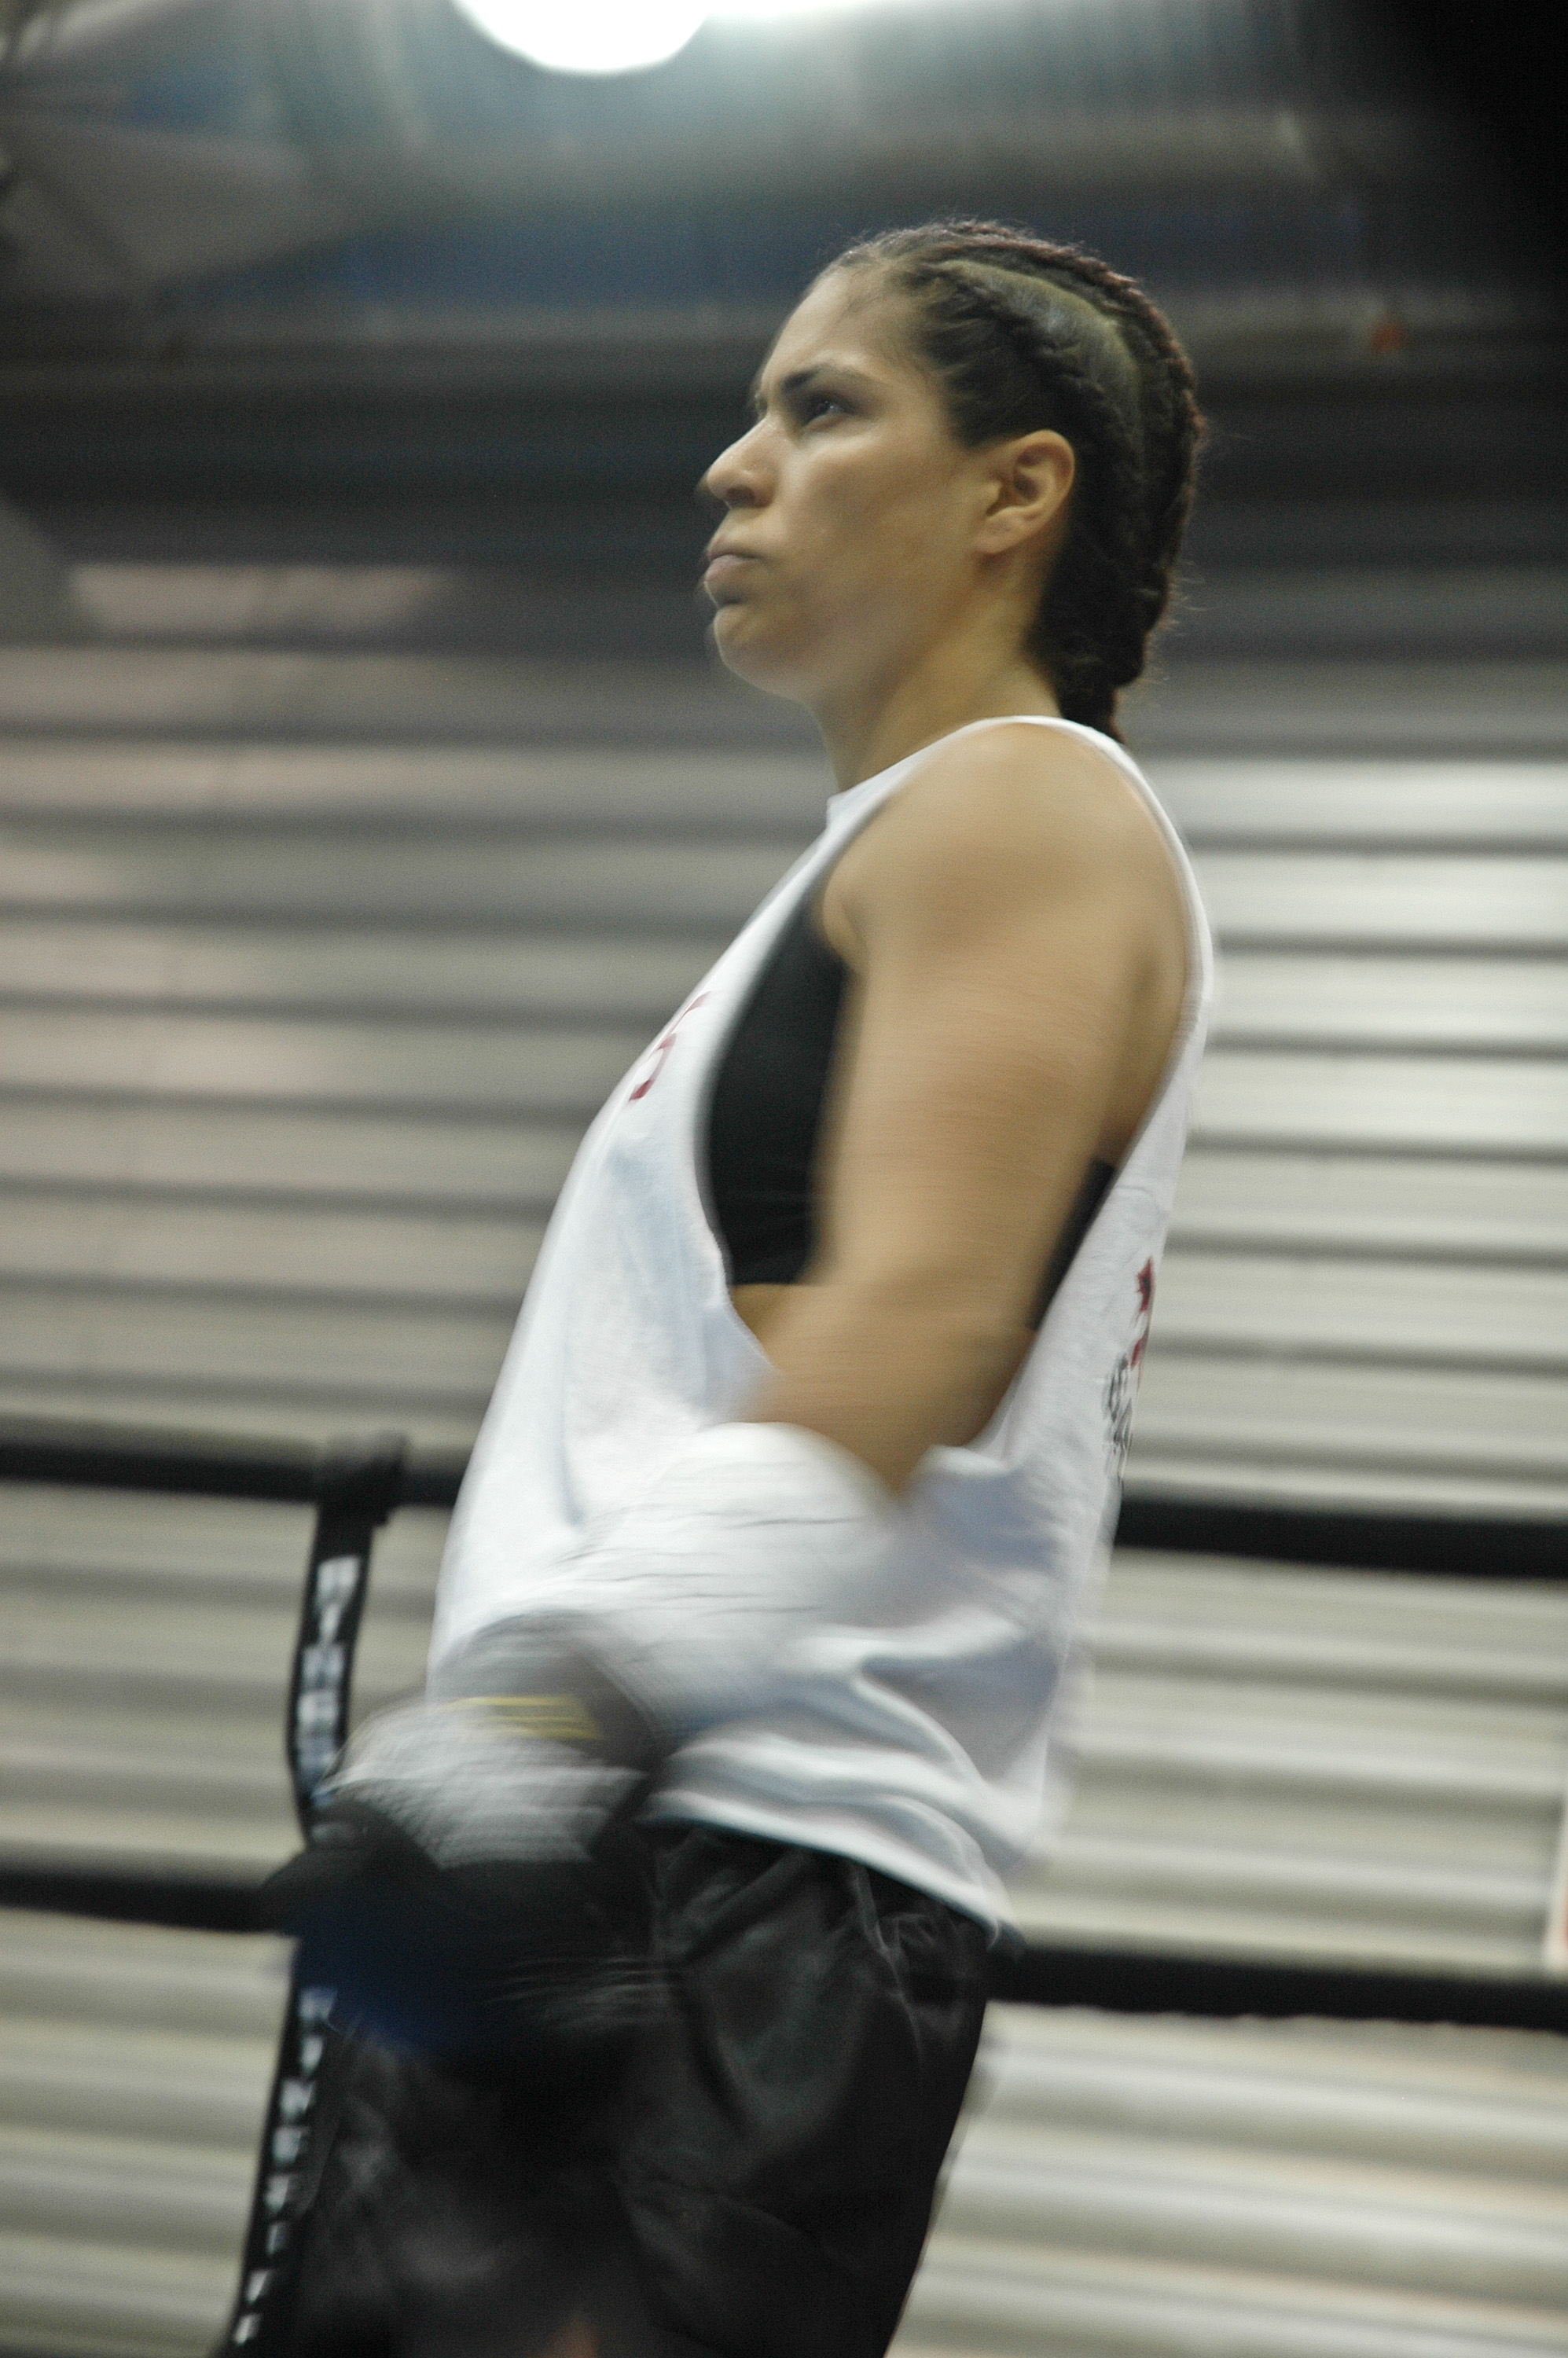 Fast feet. Fierce focus. Pro fighter Jennifer Santiago shows that boxing is a close relation to squash…